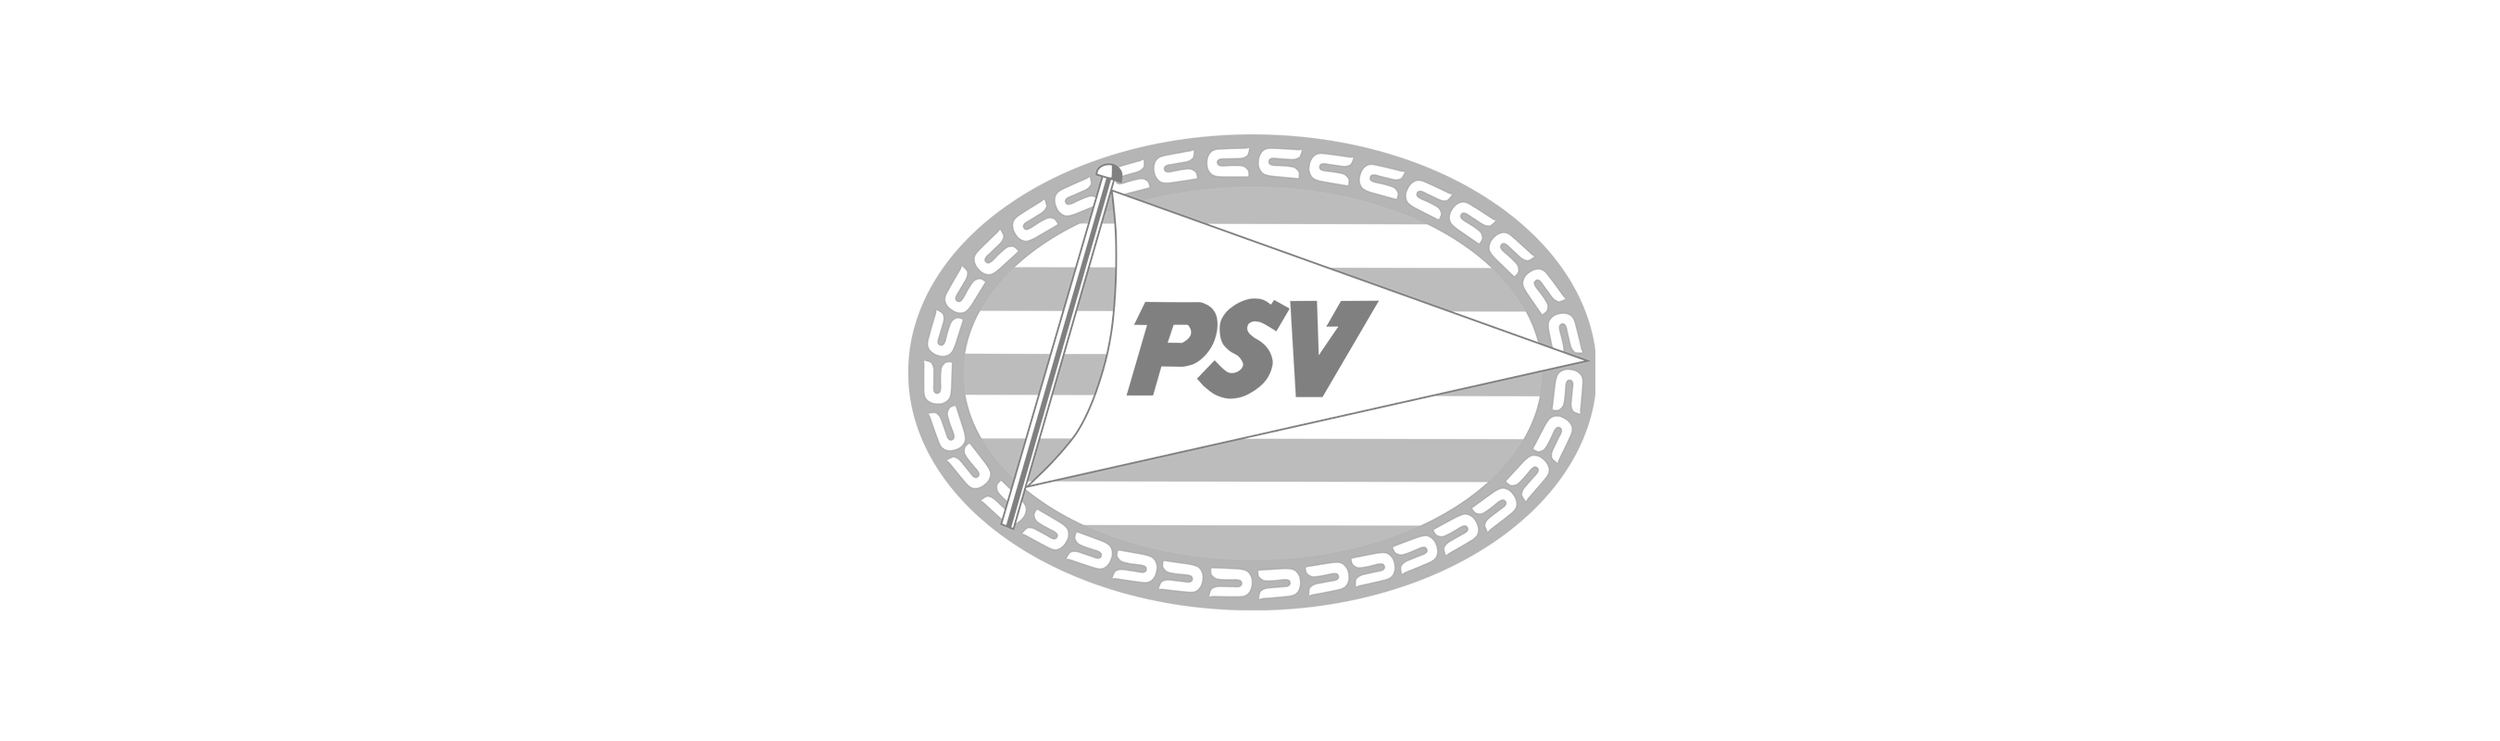 psv.png